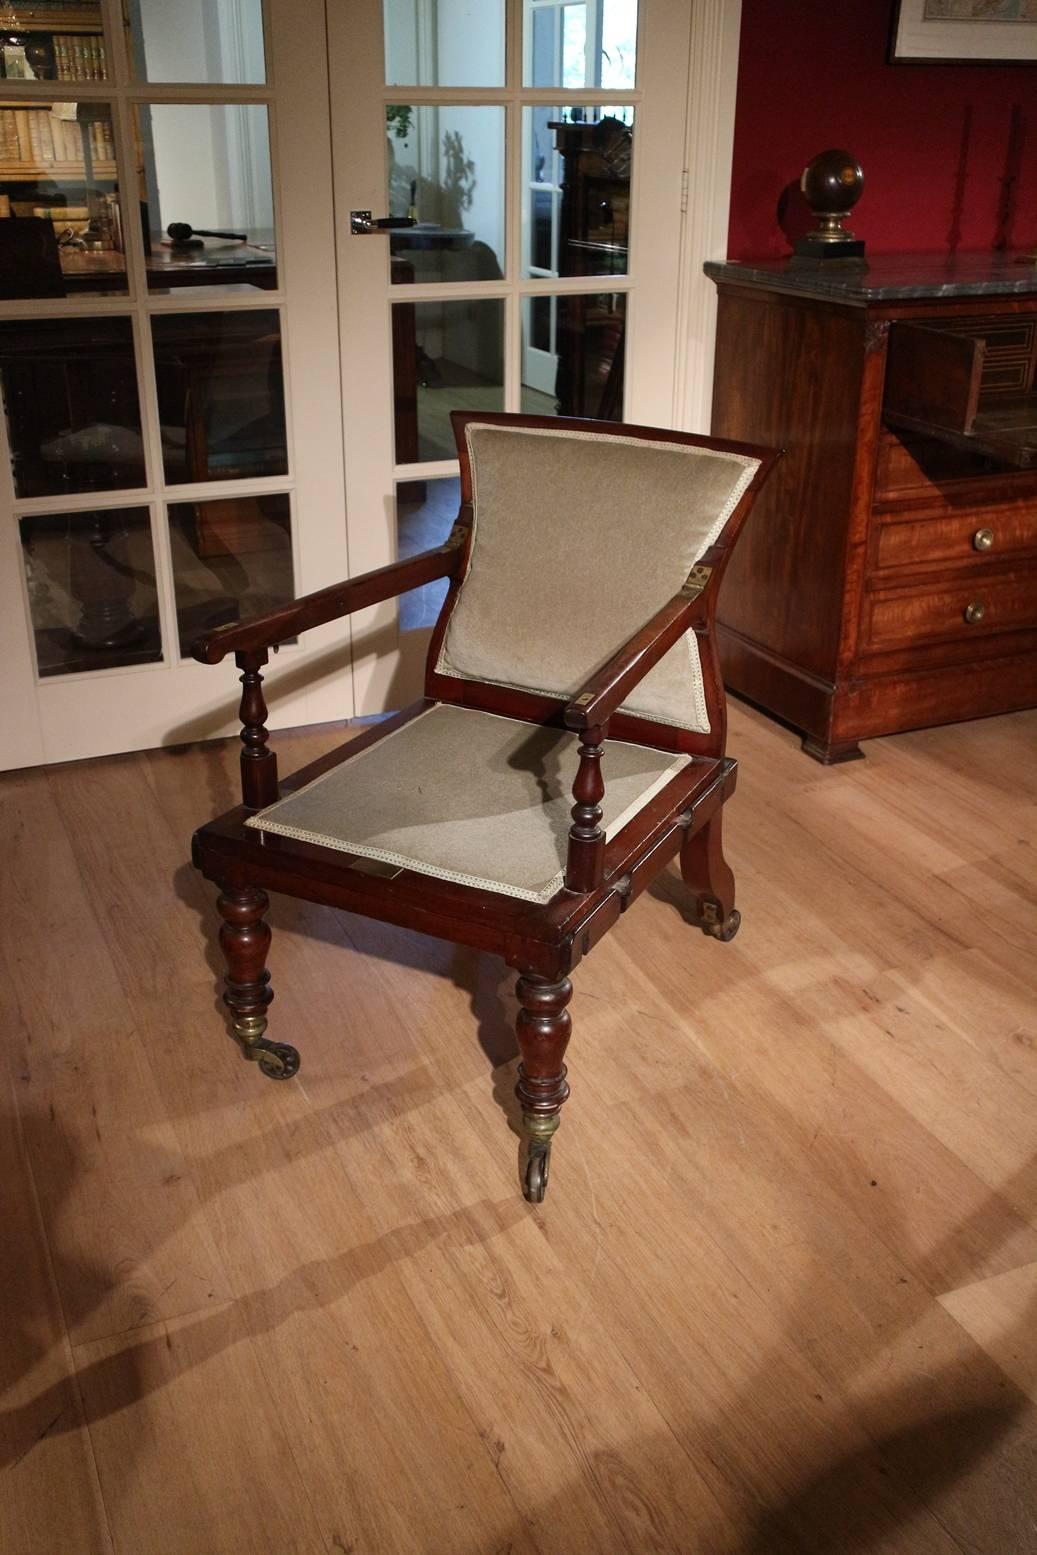 Special mahogany armchair with multiple options. The maker of this chair J. Alderman was known as the maker of inventive furniture for taking on trips and for invalids. This chair is a good example of this. Iron brackets could be hooked to the iron